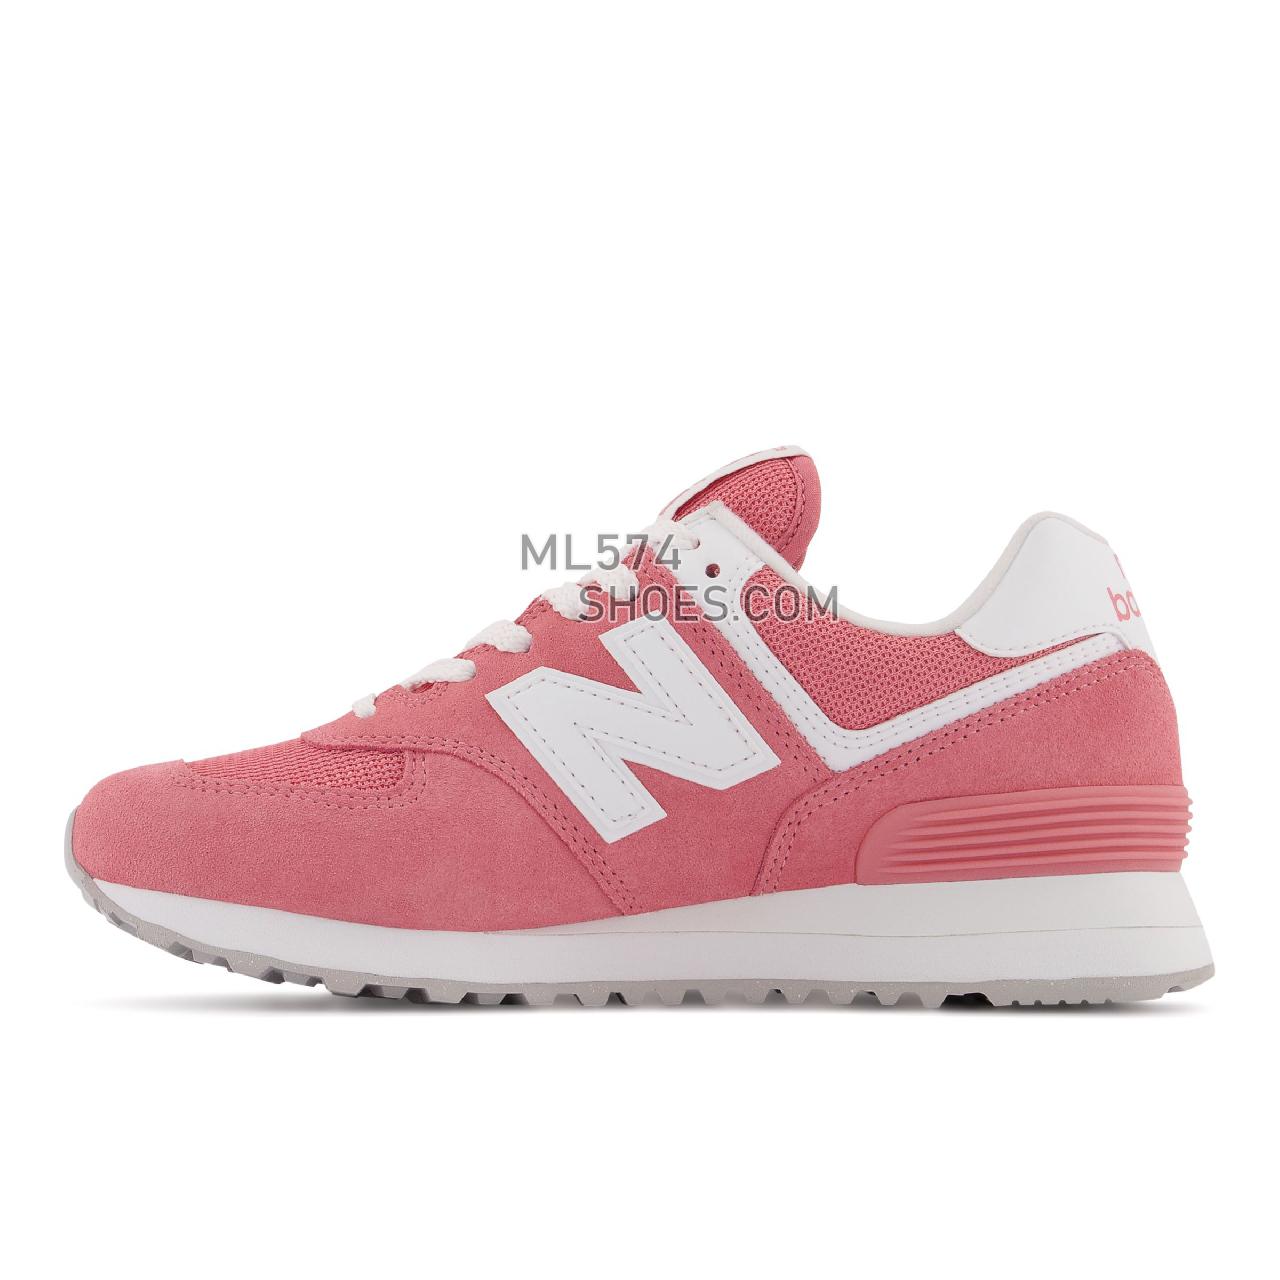 New Balance 574v2 - Women's Classic Sneakers - Natural Pink with White - WL574FP2